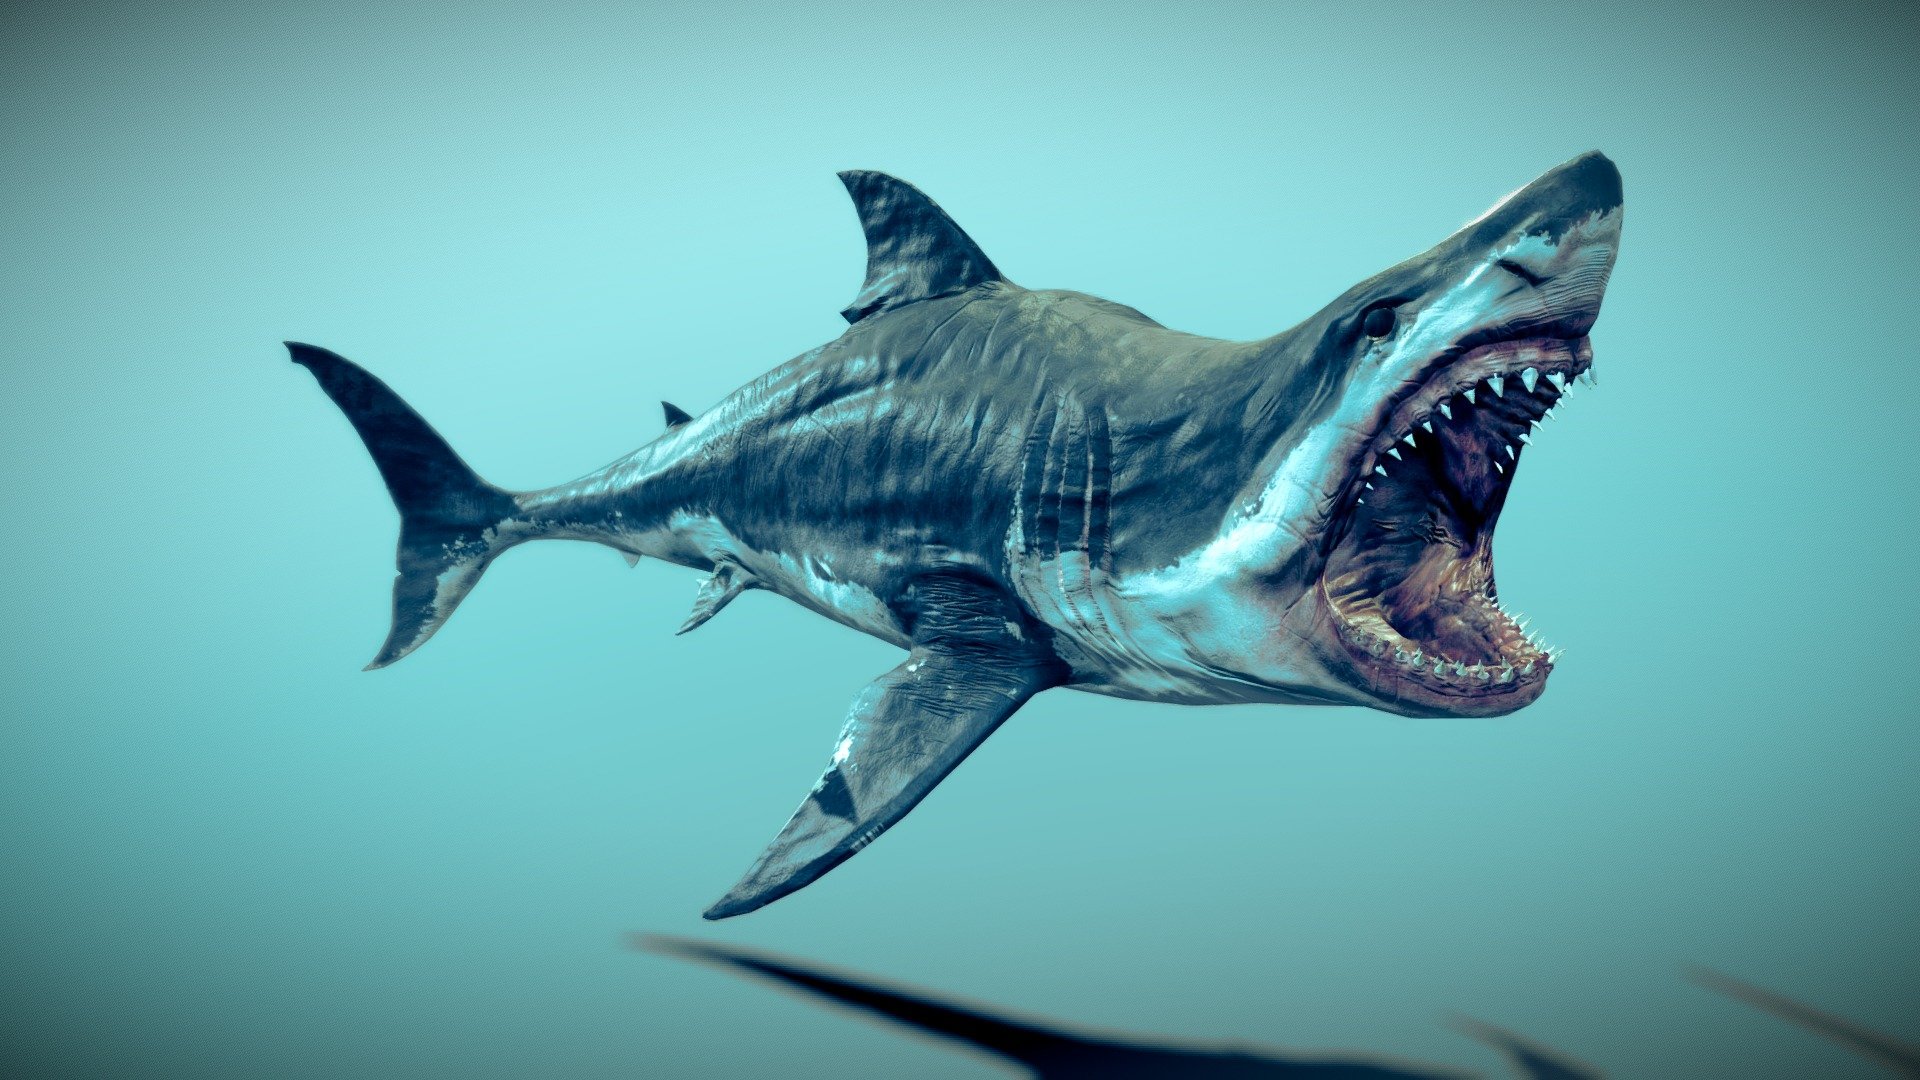 This model was made in blender3.2 and painted in substance painter

Comes with an extra fbx with 4LODS:LOD0=6666,LOD1=4625,LOD2=2817,LOD3=1427

The model have 2variants for megalodon (thepreviewone) with a damaged version and another that is basiclly a casual white shark without not so much detail and with no scratches,comes with Diffuse,Normal(directx and opengl),Roughness(dry and wet),and AOmaps,uvunwrapped it manually

Comes with blend file with an control rig(with ik,etc)and a export rig that is just a copy transforms of the export rig without all the control bones also i add a multires modifier with a max of 4 subdivisions

Already tested it in Unreal Engine and unity and the animations work fine ,with that said if you have compatibility issues when importing animations to other softwares apart of blender,leave it at the comments so i can fix it

This is a remodel of my old shark models im planning on doing the mosasaurus next and then continue with other models,anyways hope you like it :D - White Shark - Buy Royalty Free 3D model by GoldenZtuff (@dhjwdwd) 3d model